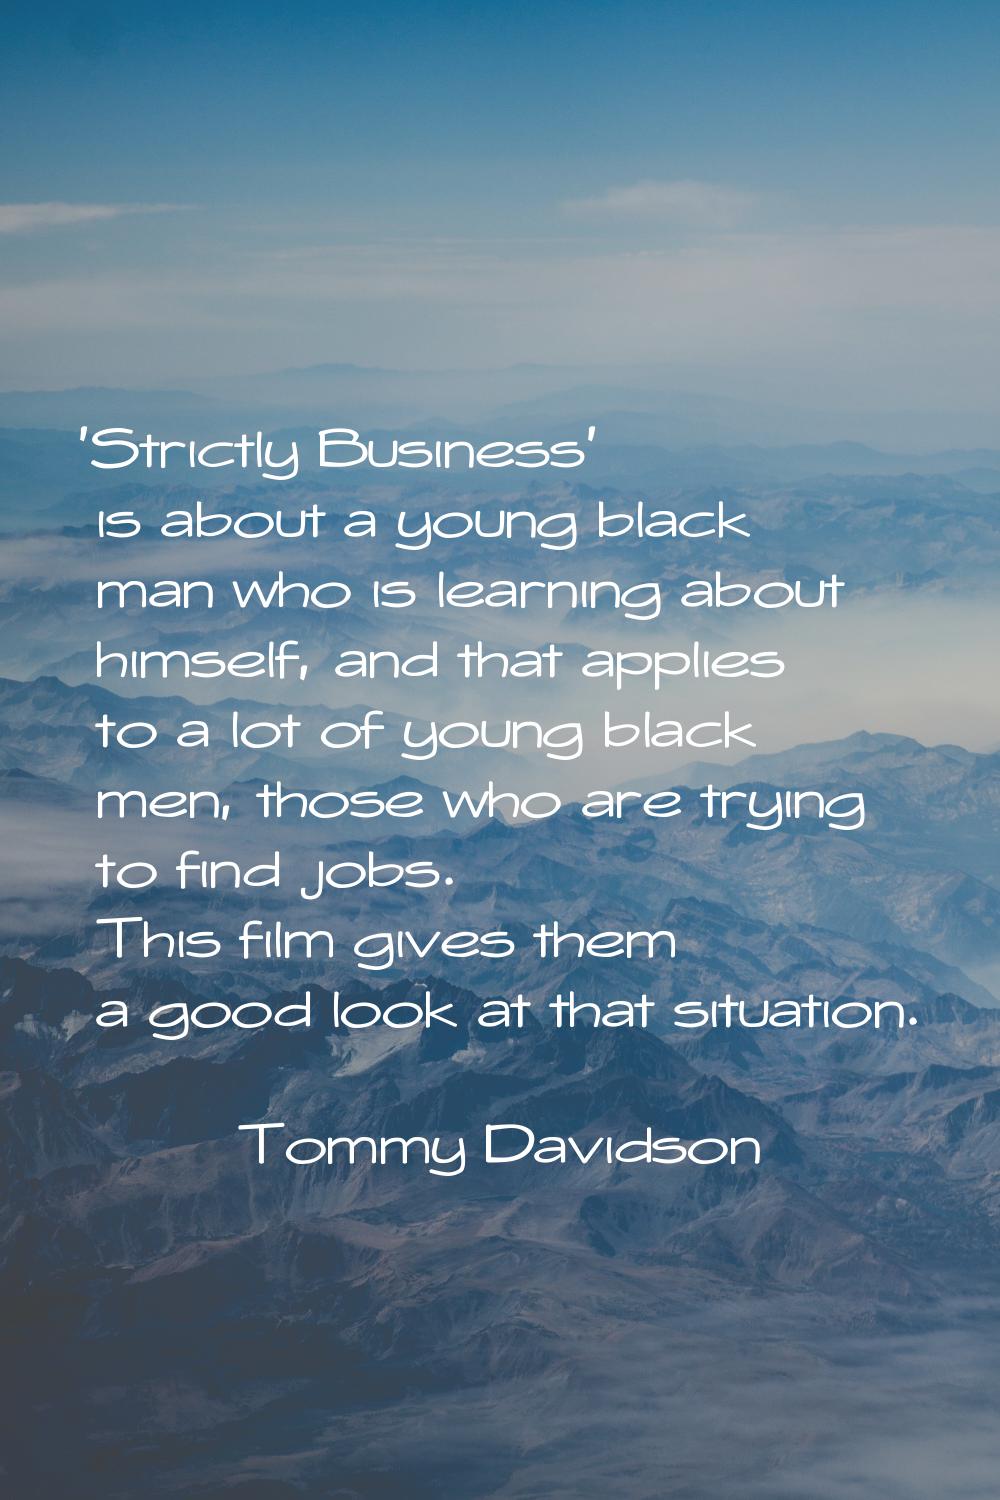 'Strictly Business' is about a young black man who is learning about himself, and that applies to a